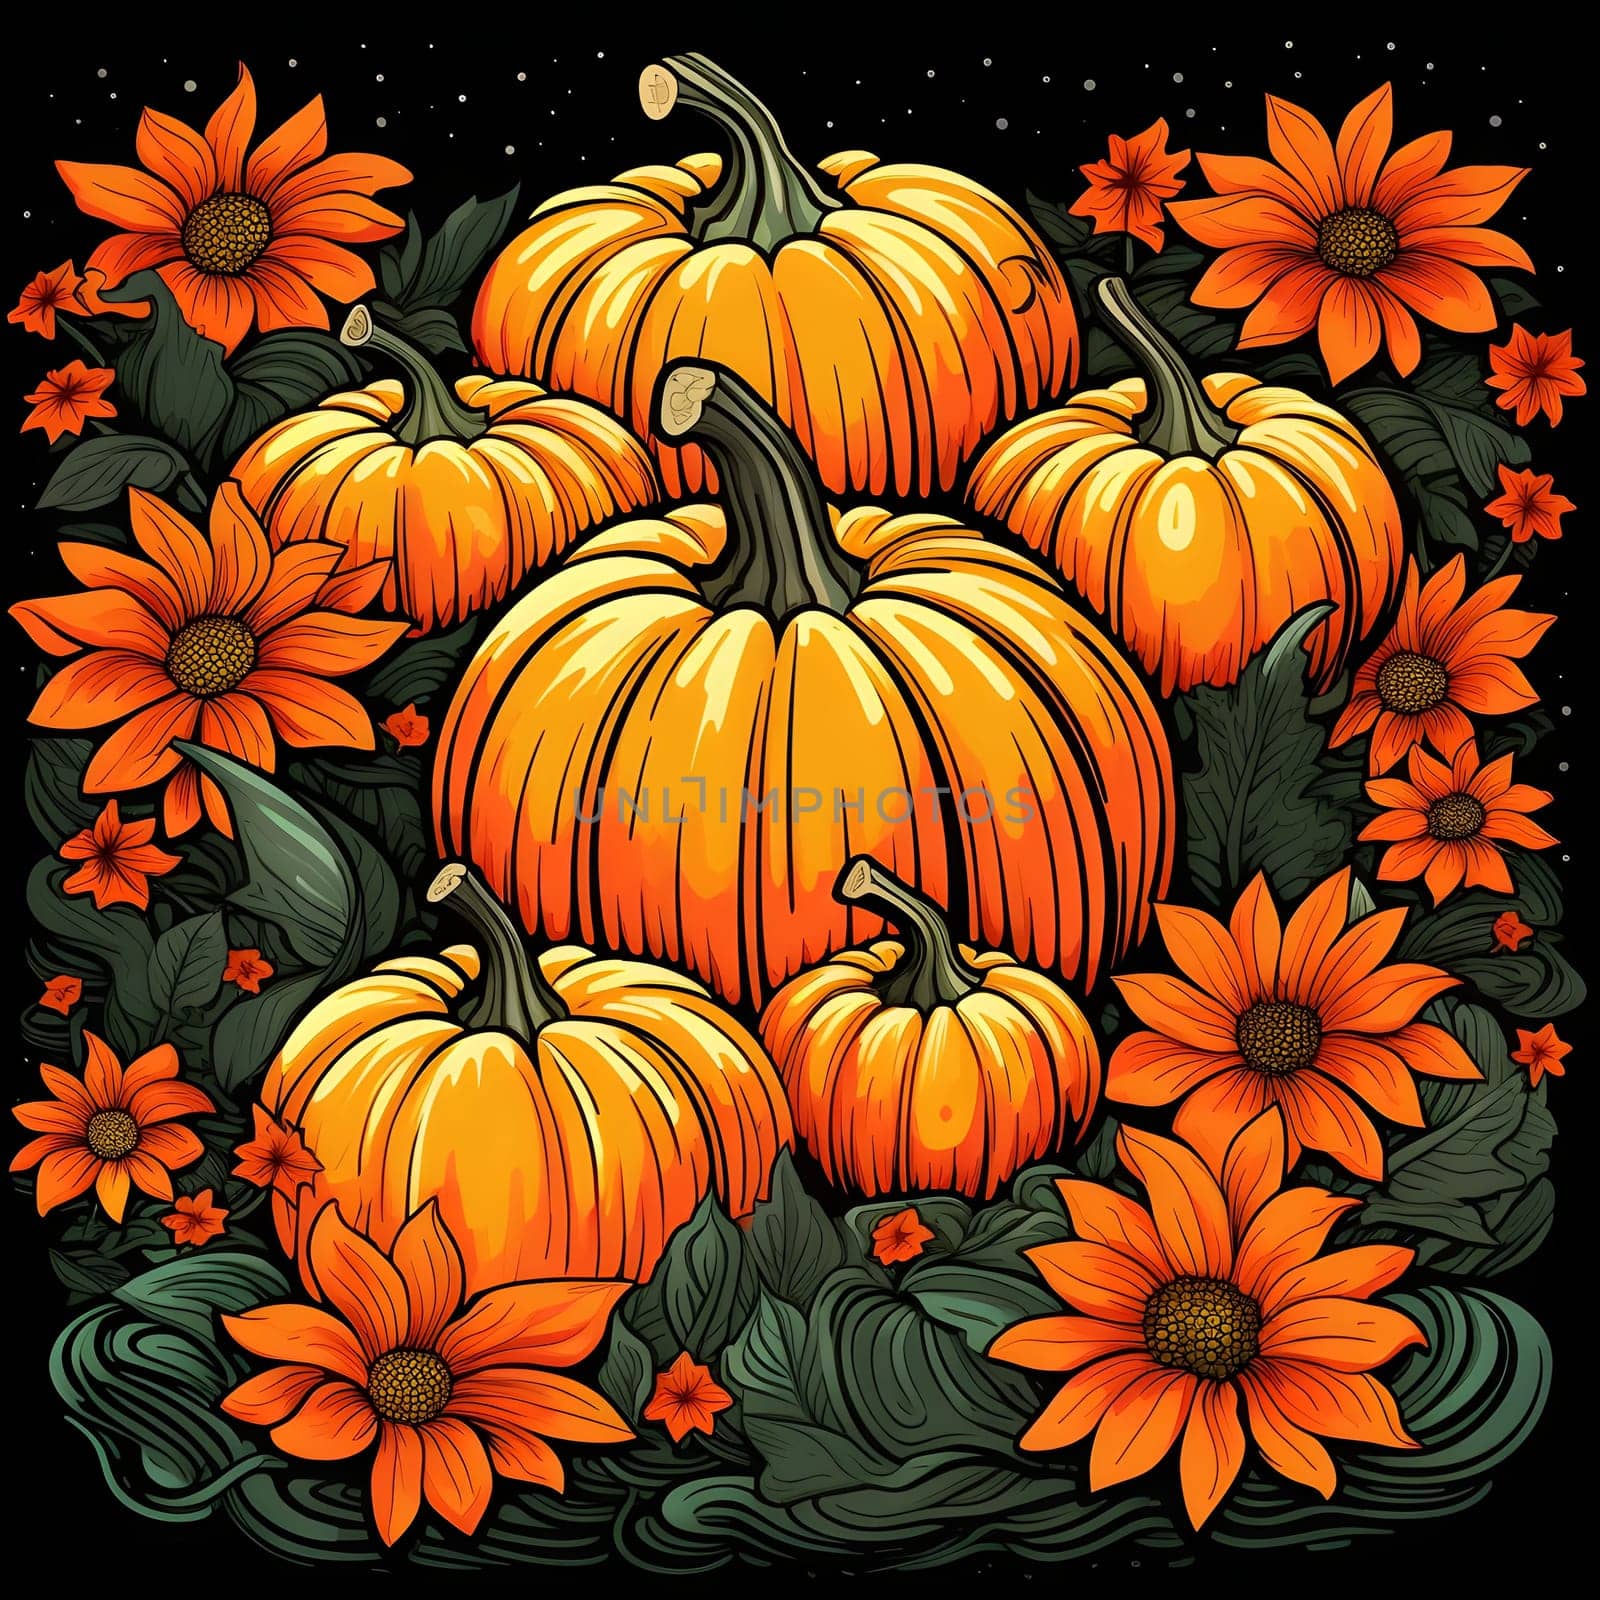 A pair of pumpkins and orange Flowers with Green Leaves on a black background illustration. Pumpkin as a dish of thanksgiving for the harvest. An atmosphere of joy and celebration.